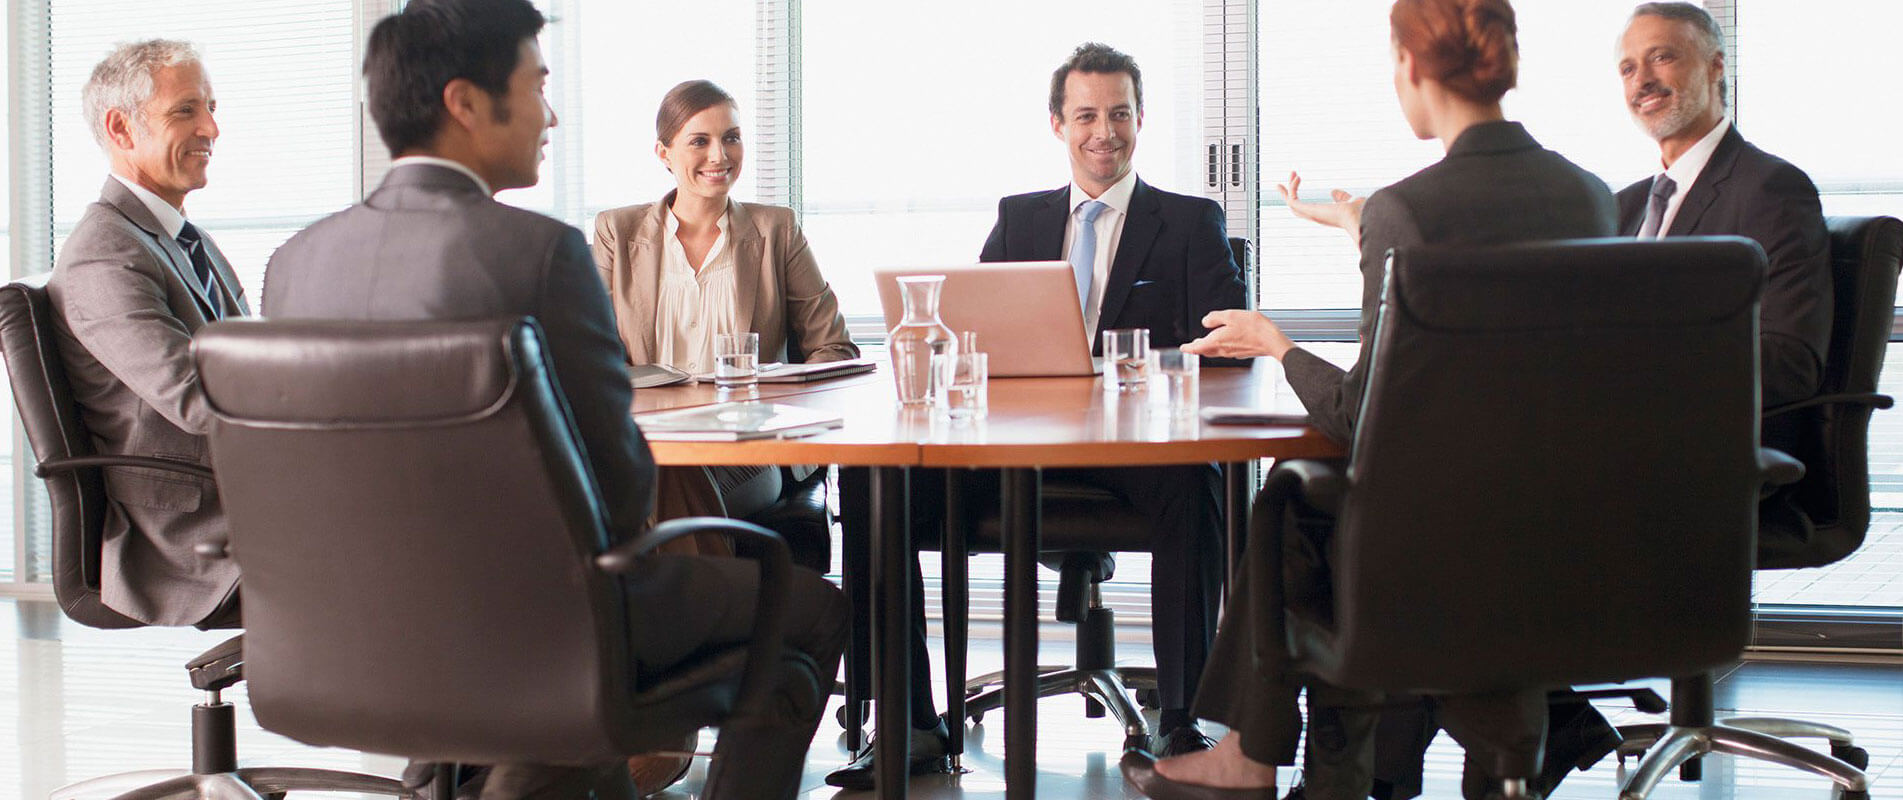 A company meeting at a board table